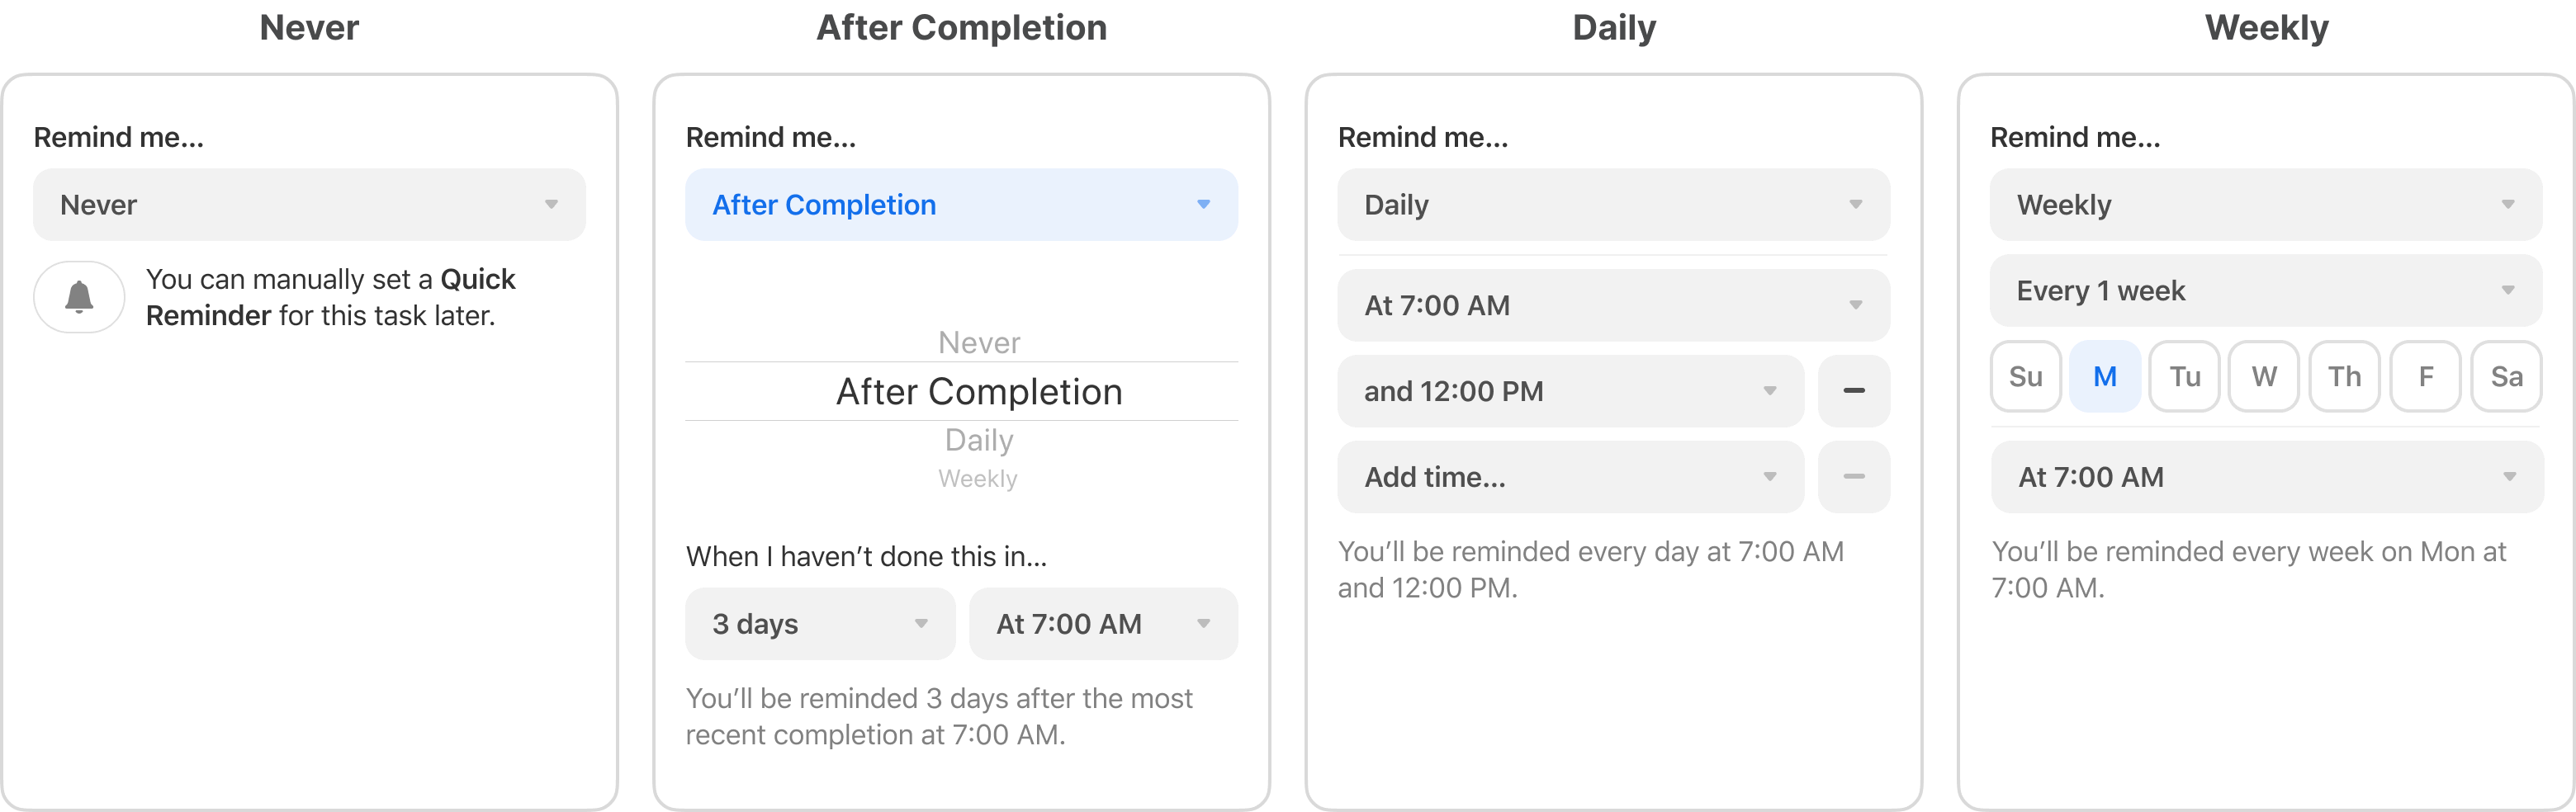 4 states of the auto reminders settings shown under the captions: never, periodically, daily, and weekly